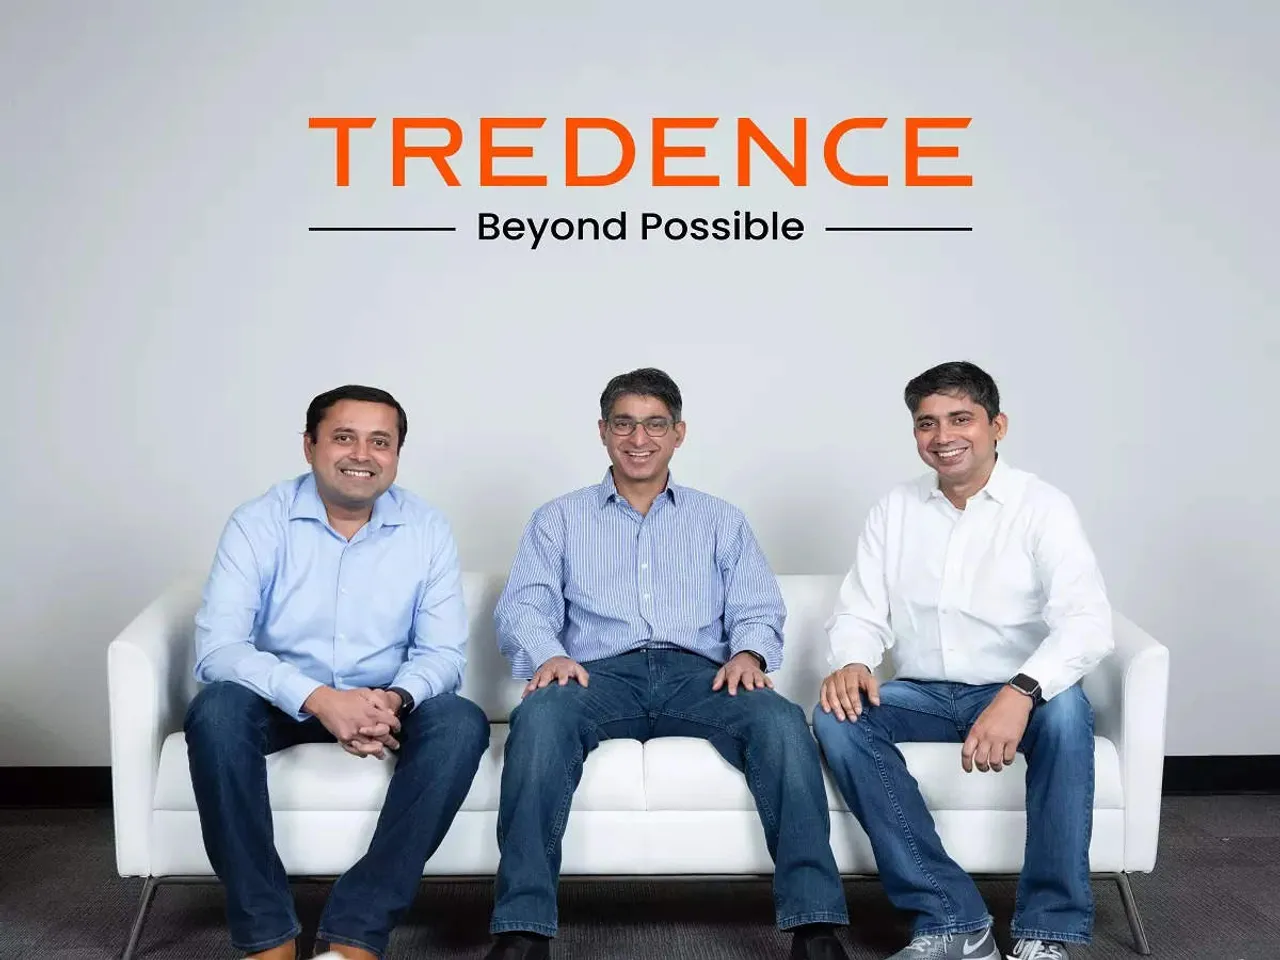 Data science startup Tredence raises $175M in a Series B round from Advent